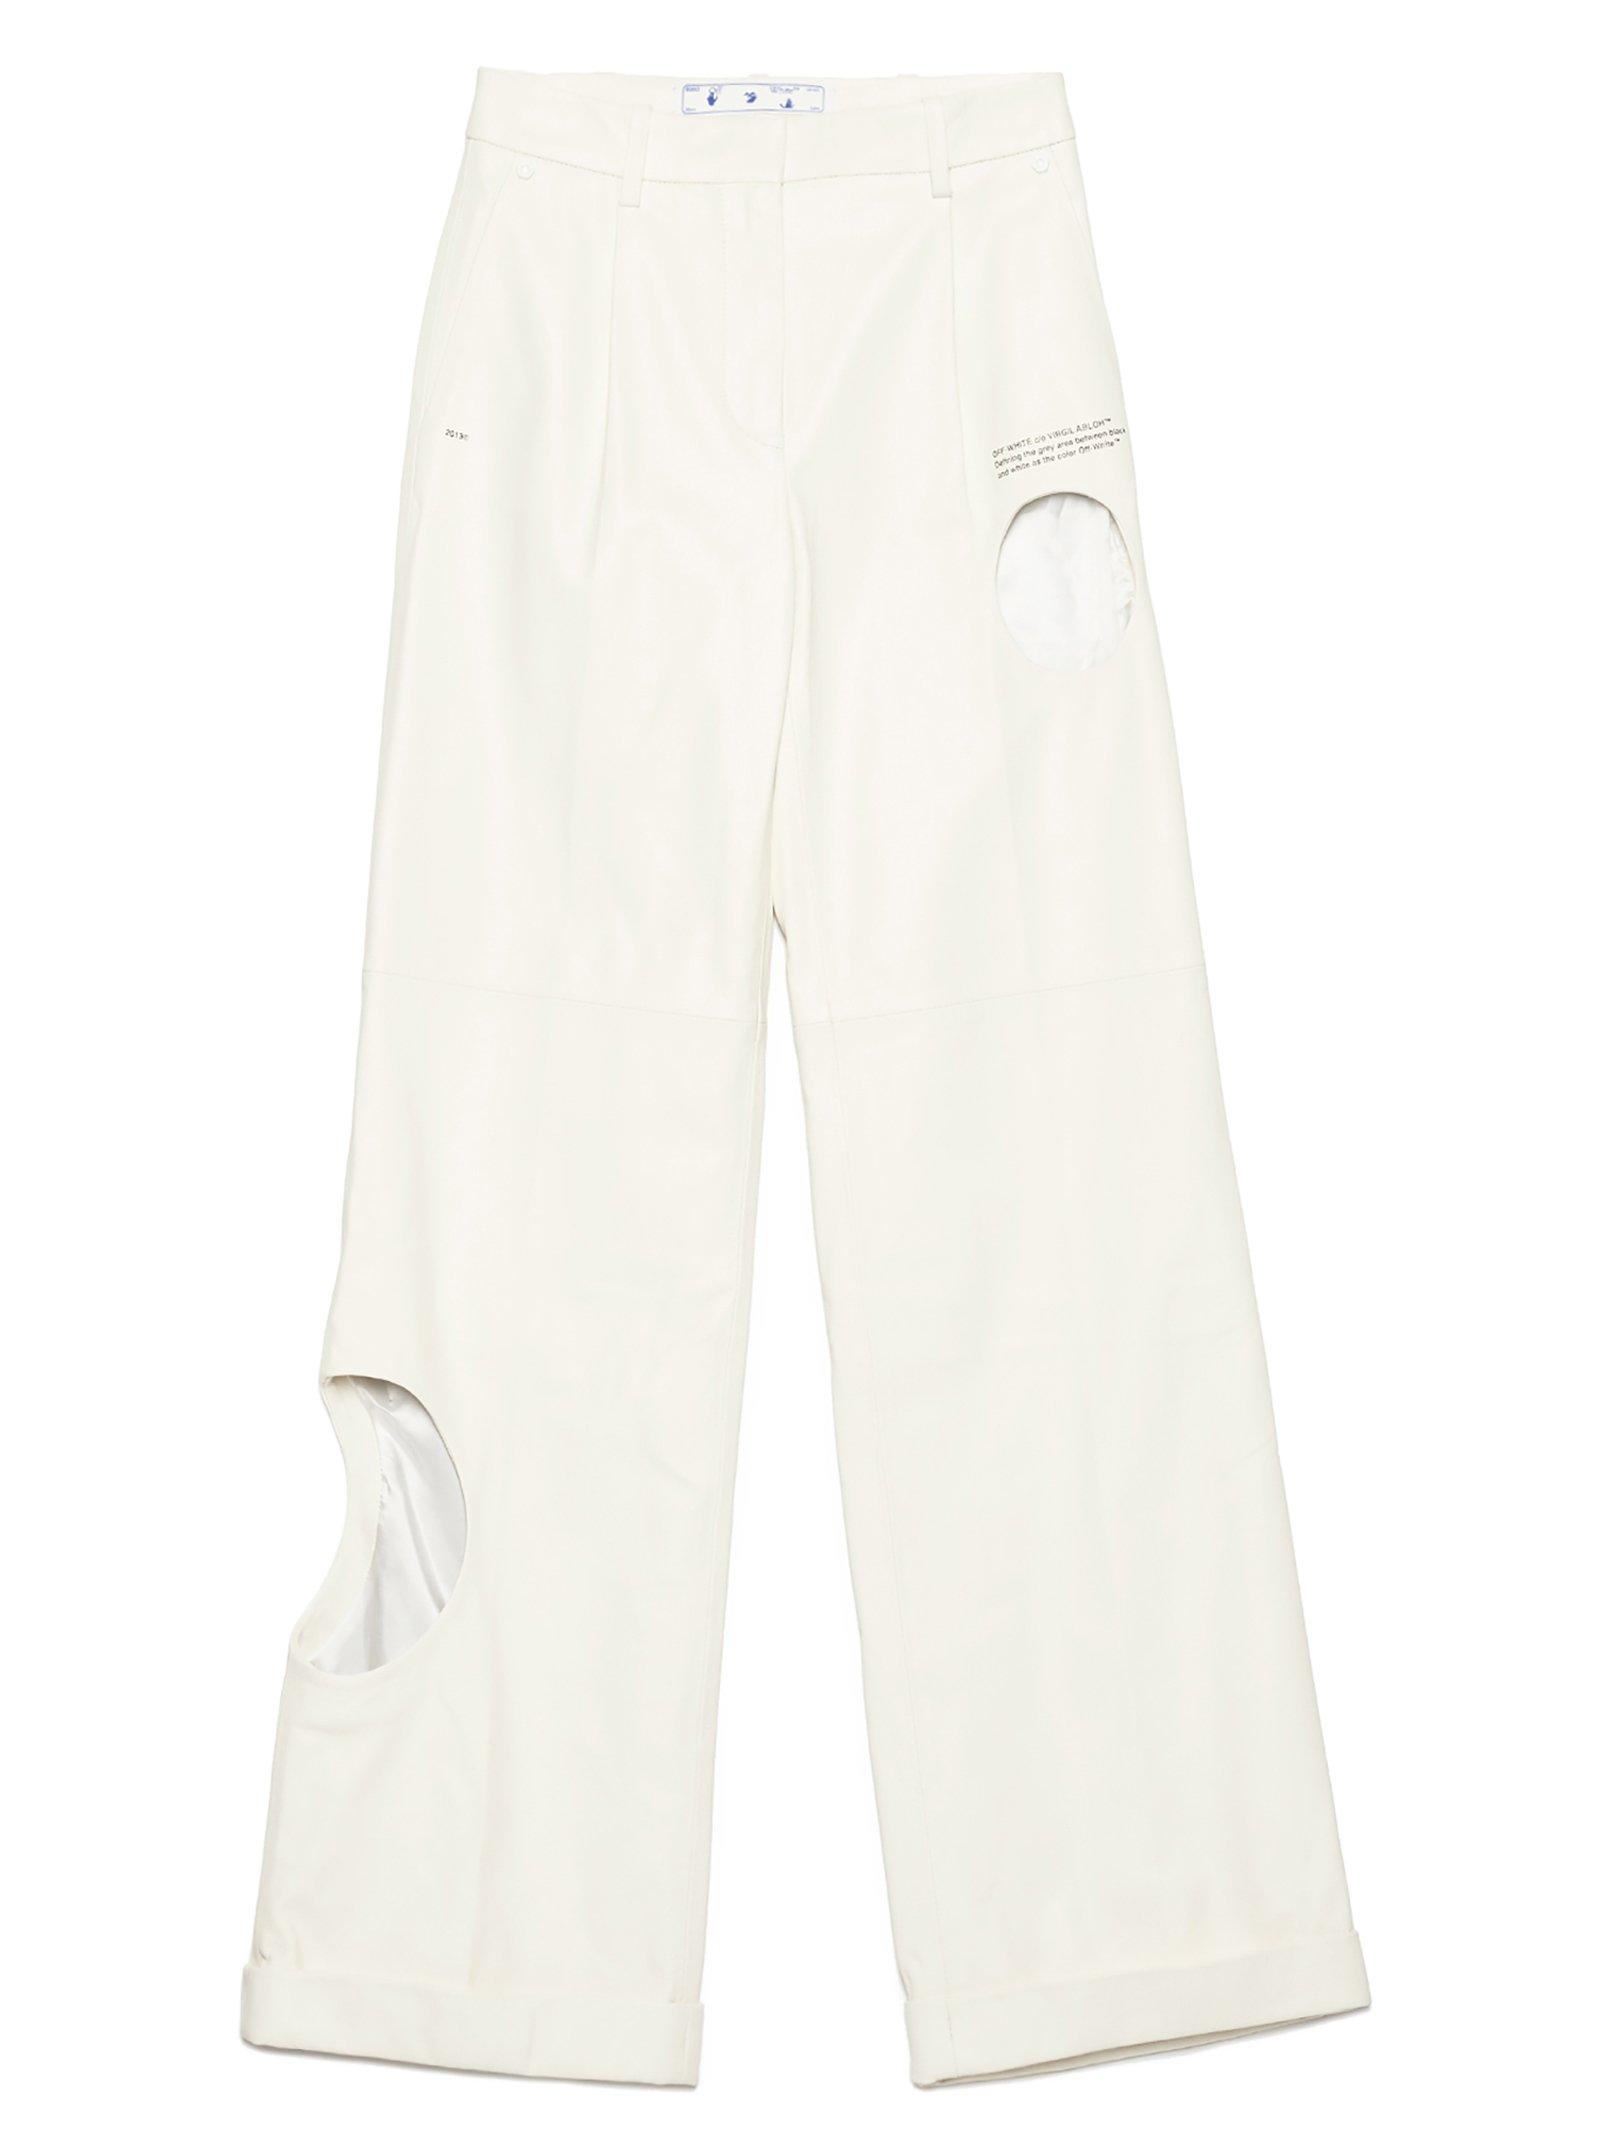 Off-White c/o Virgil Abloh Meteor Wide Leg Leather Pants in White - Lyst